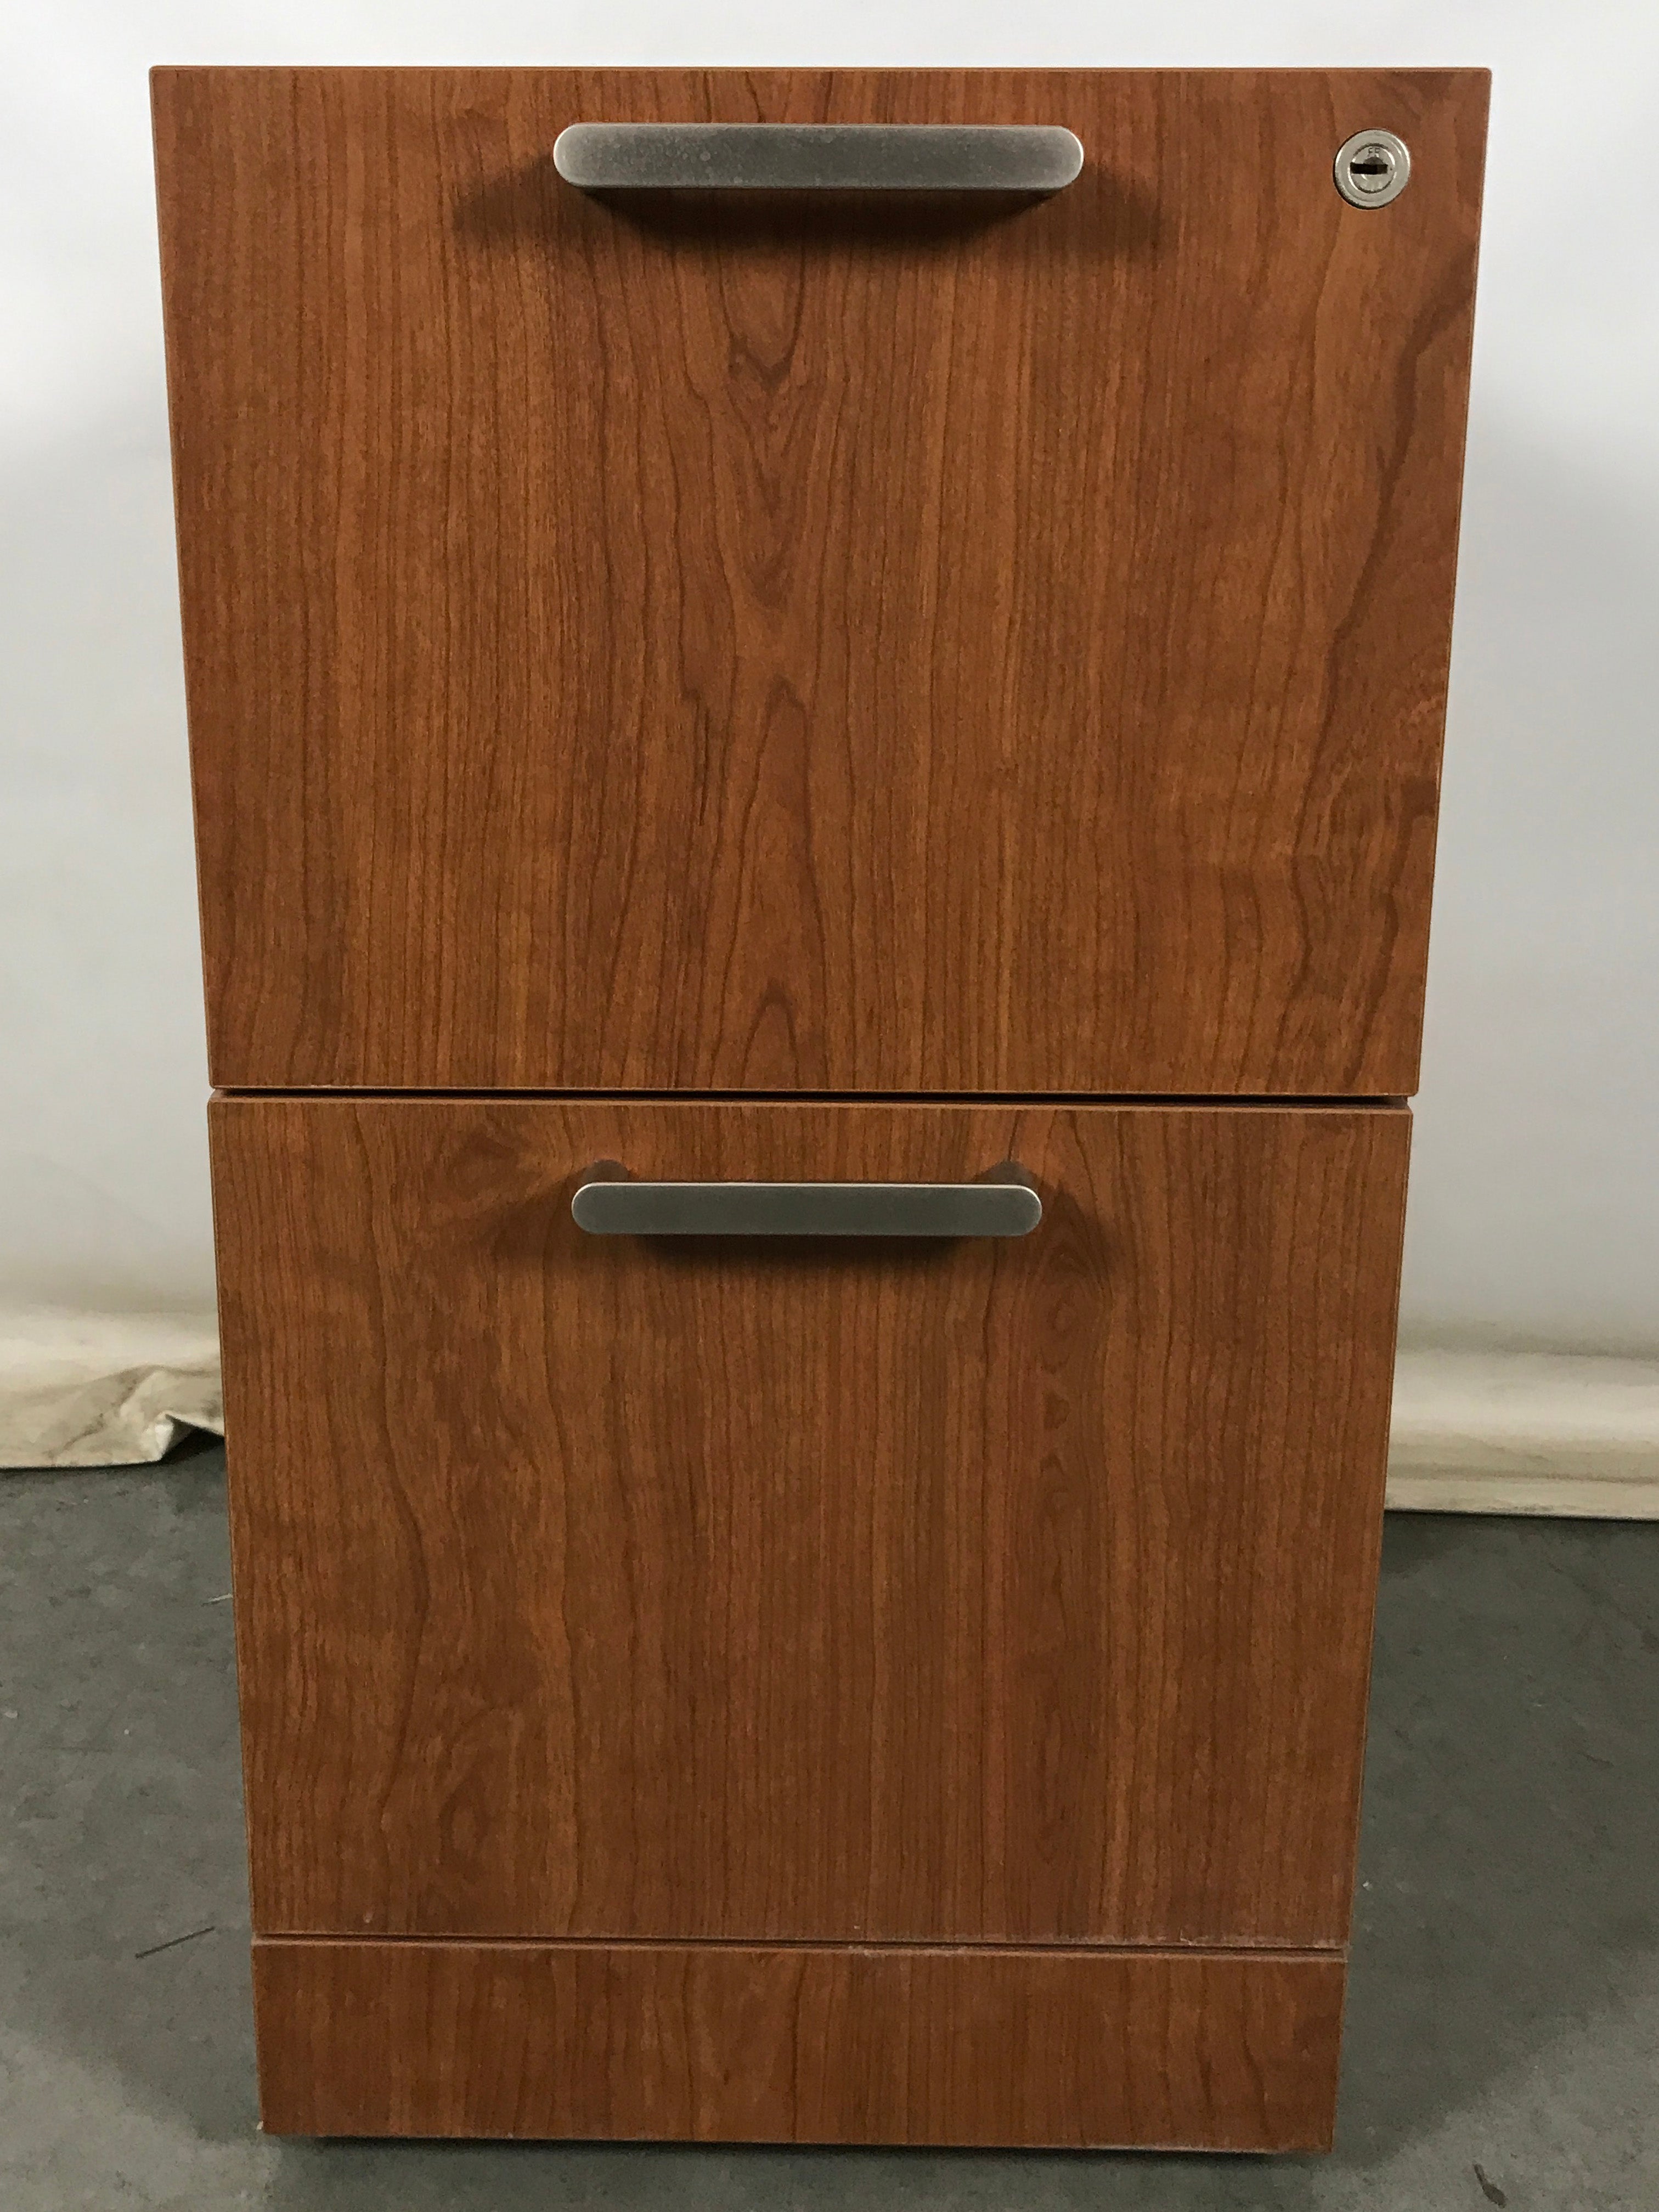 Steelcase 2 Drawer Wooden File Cabinet